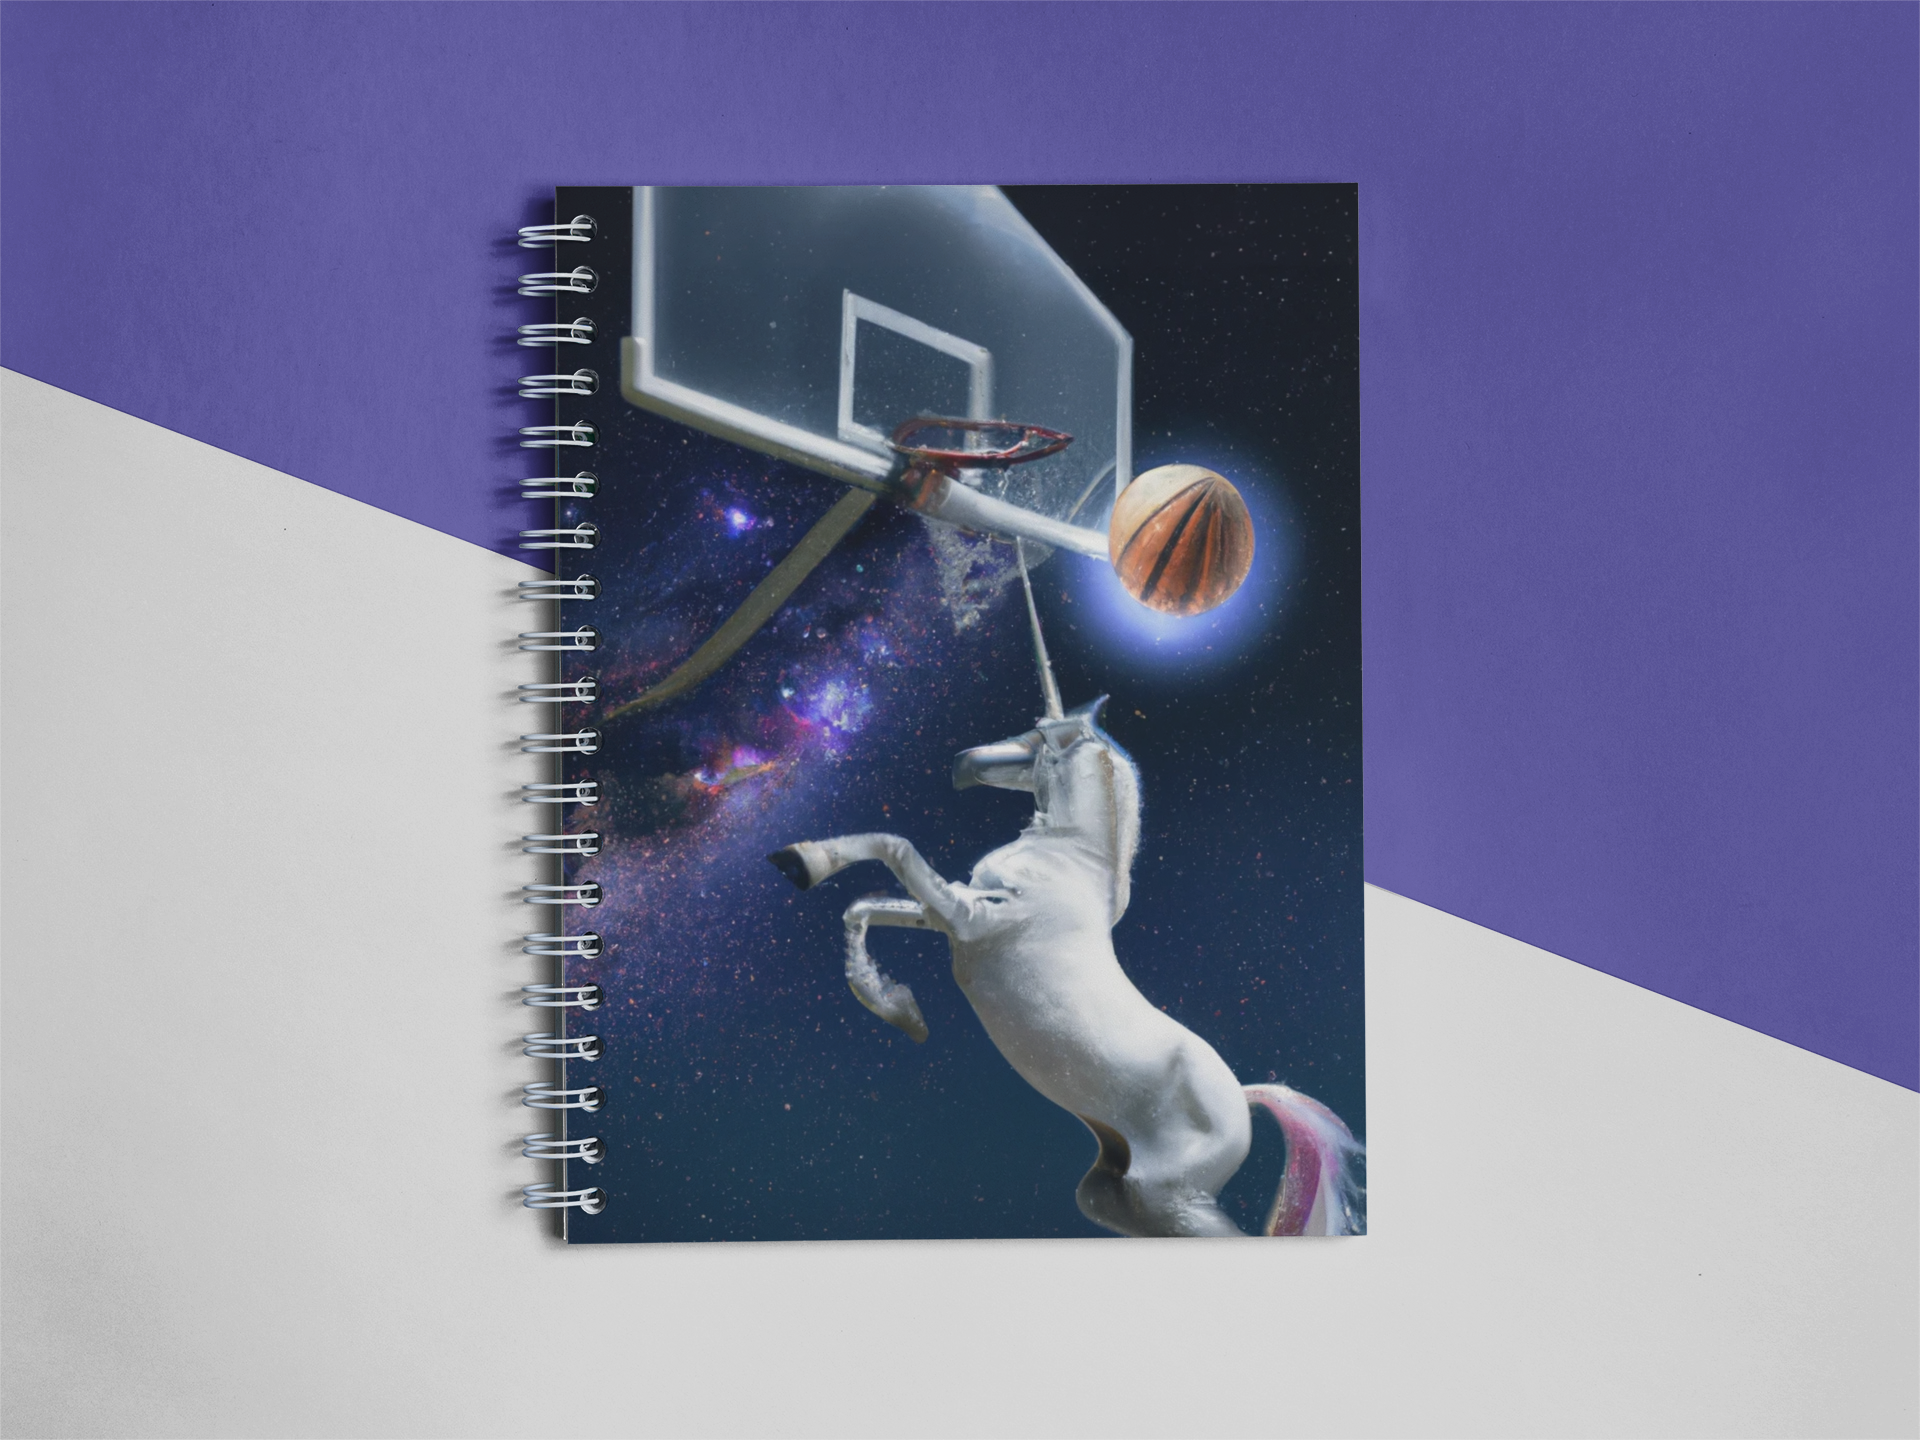 Mockup of a notebook with Dall-E 2 graphic of a unicorn slam dunking a basketball in space - cuttingforbusiness.com.